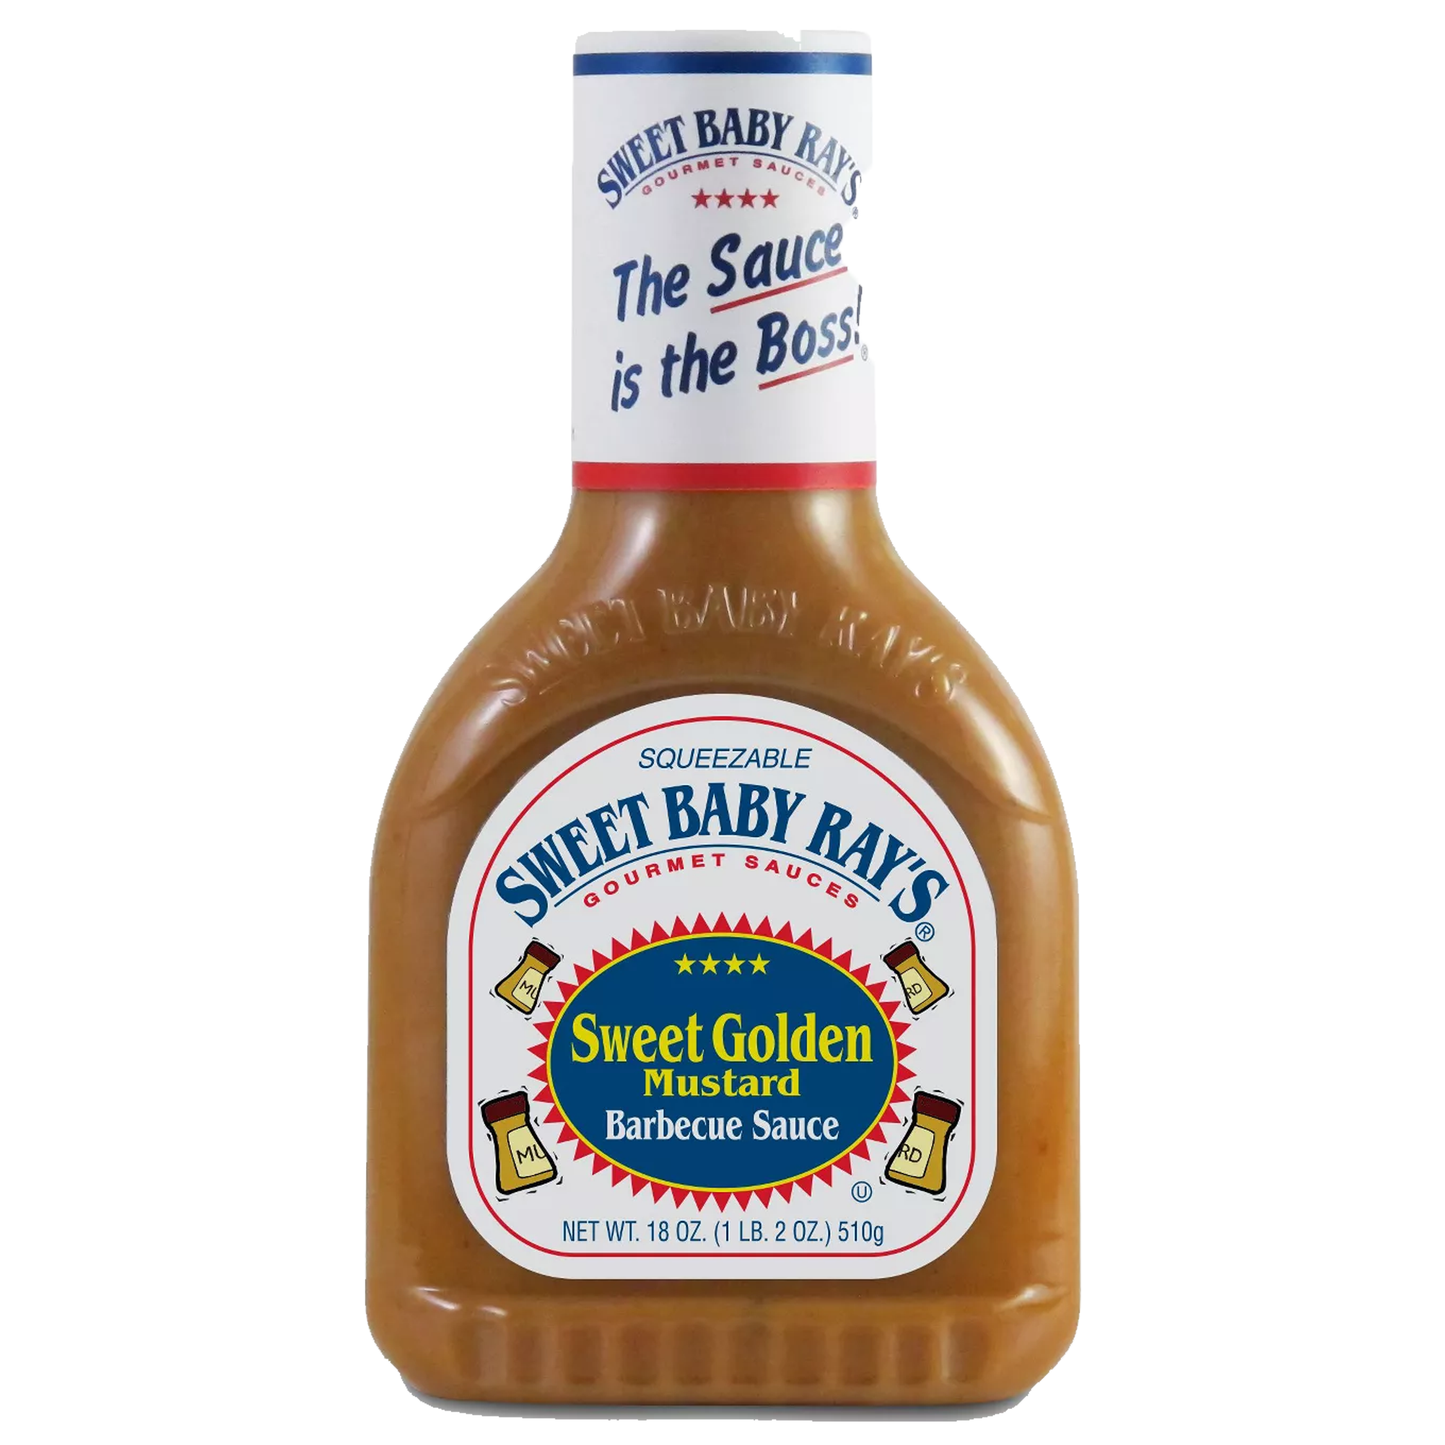 Sweet Baby Ray's Sweet Golden Mustard Barbecue Sauce 510g